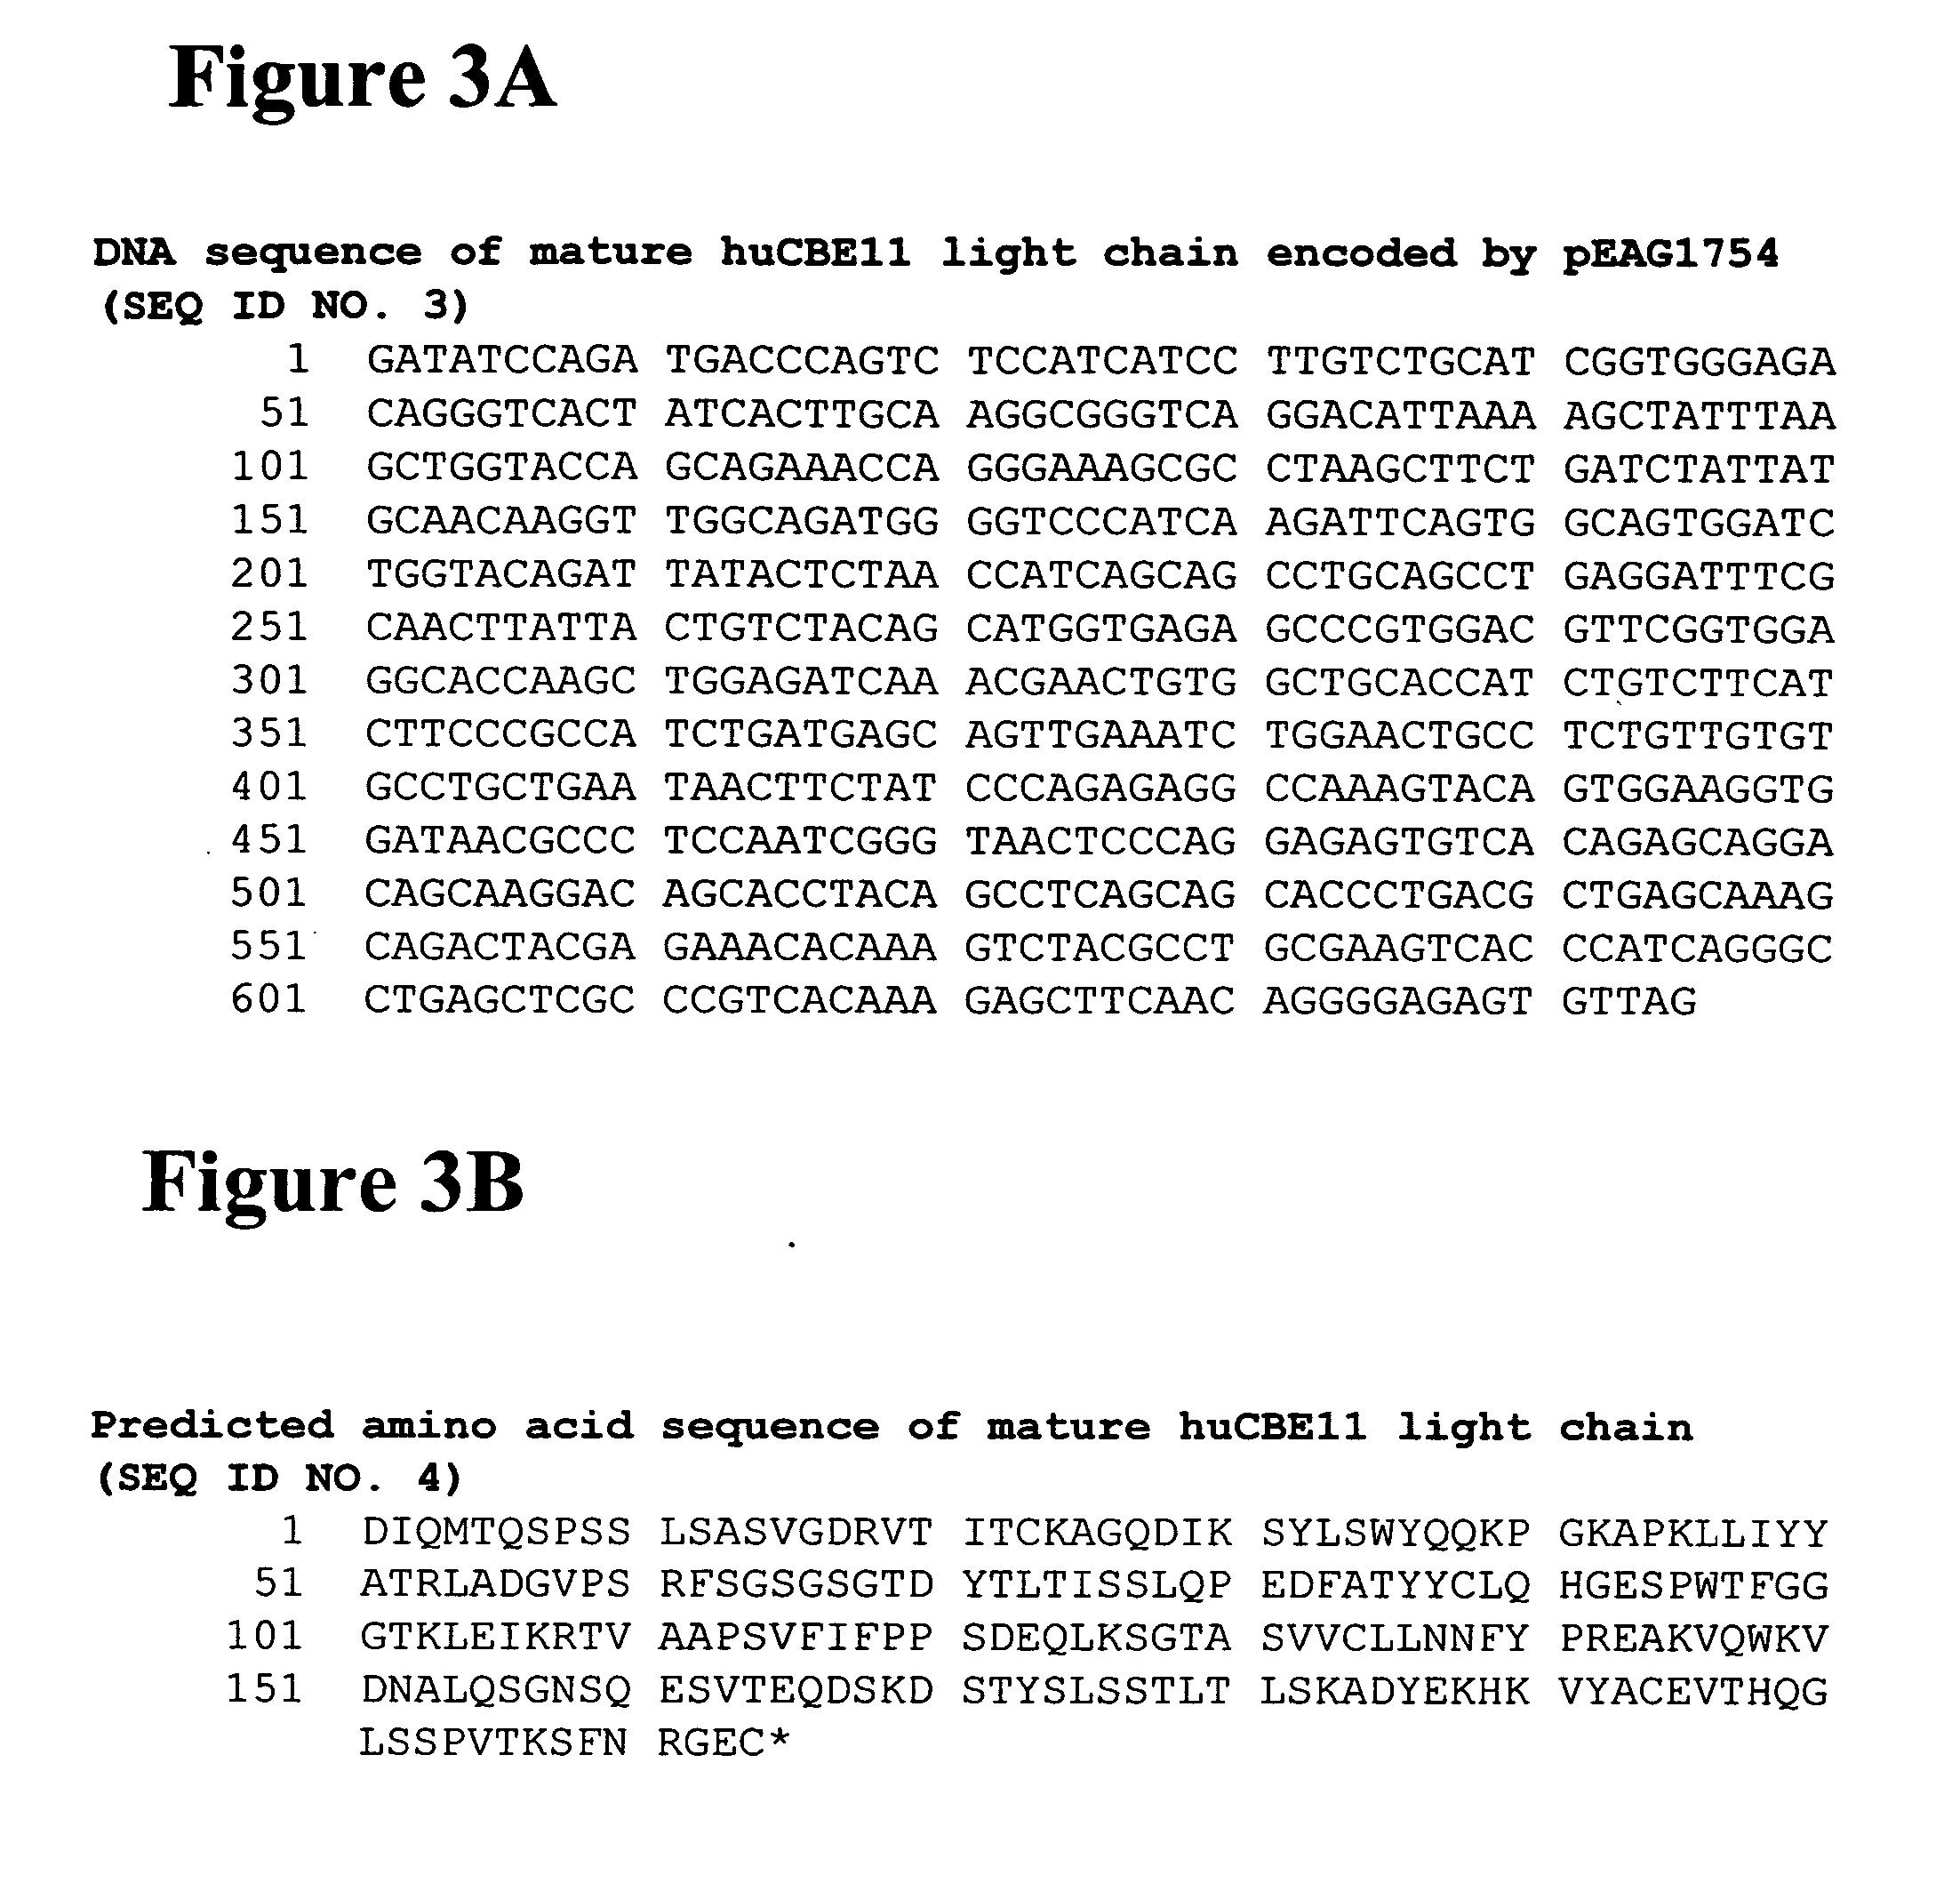 Neonatal Fc receptor (FcRn)-binding polypeptide variants, dimeric Fc binding proteins and methods related thereto